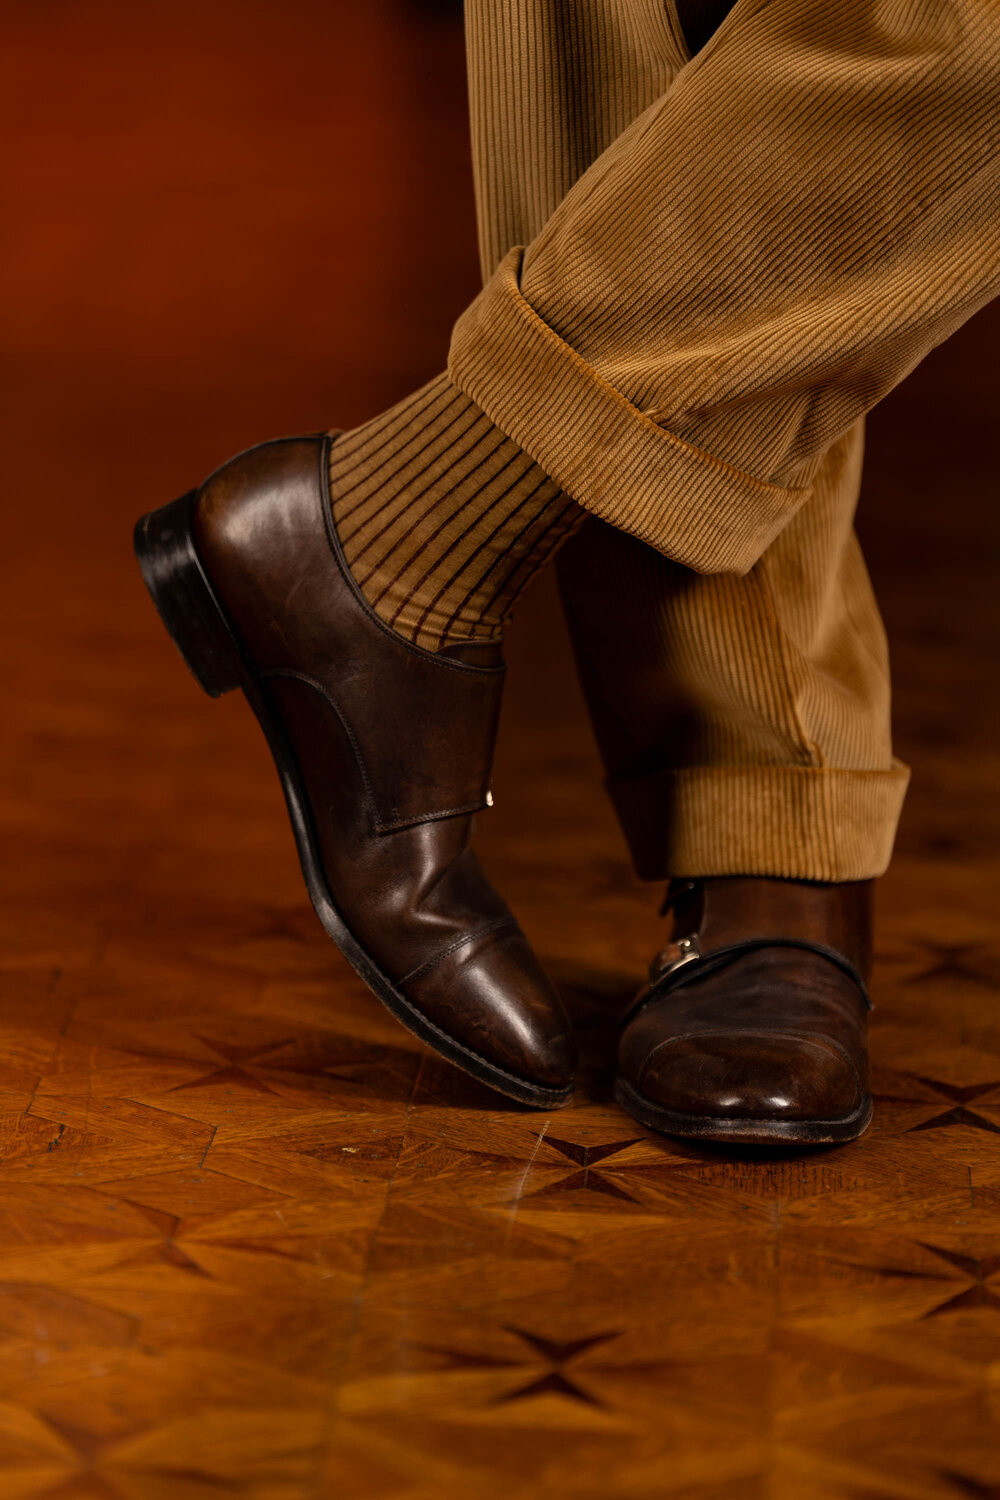 Camel Corduroy trousers with cuffs paired with brown monk straps and Caramel and Dark Burgundy Shadow Stripe Ribbed Socks.